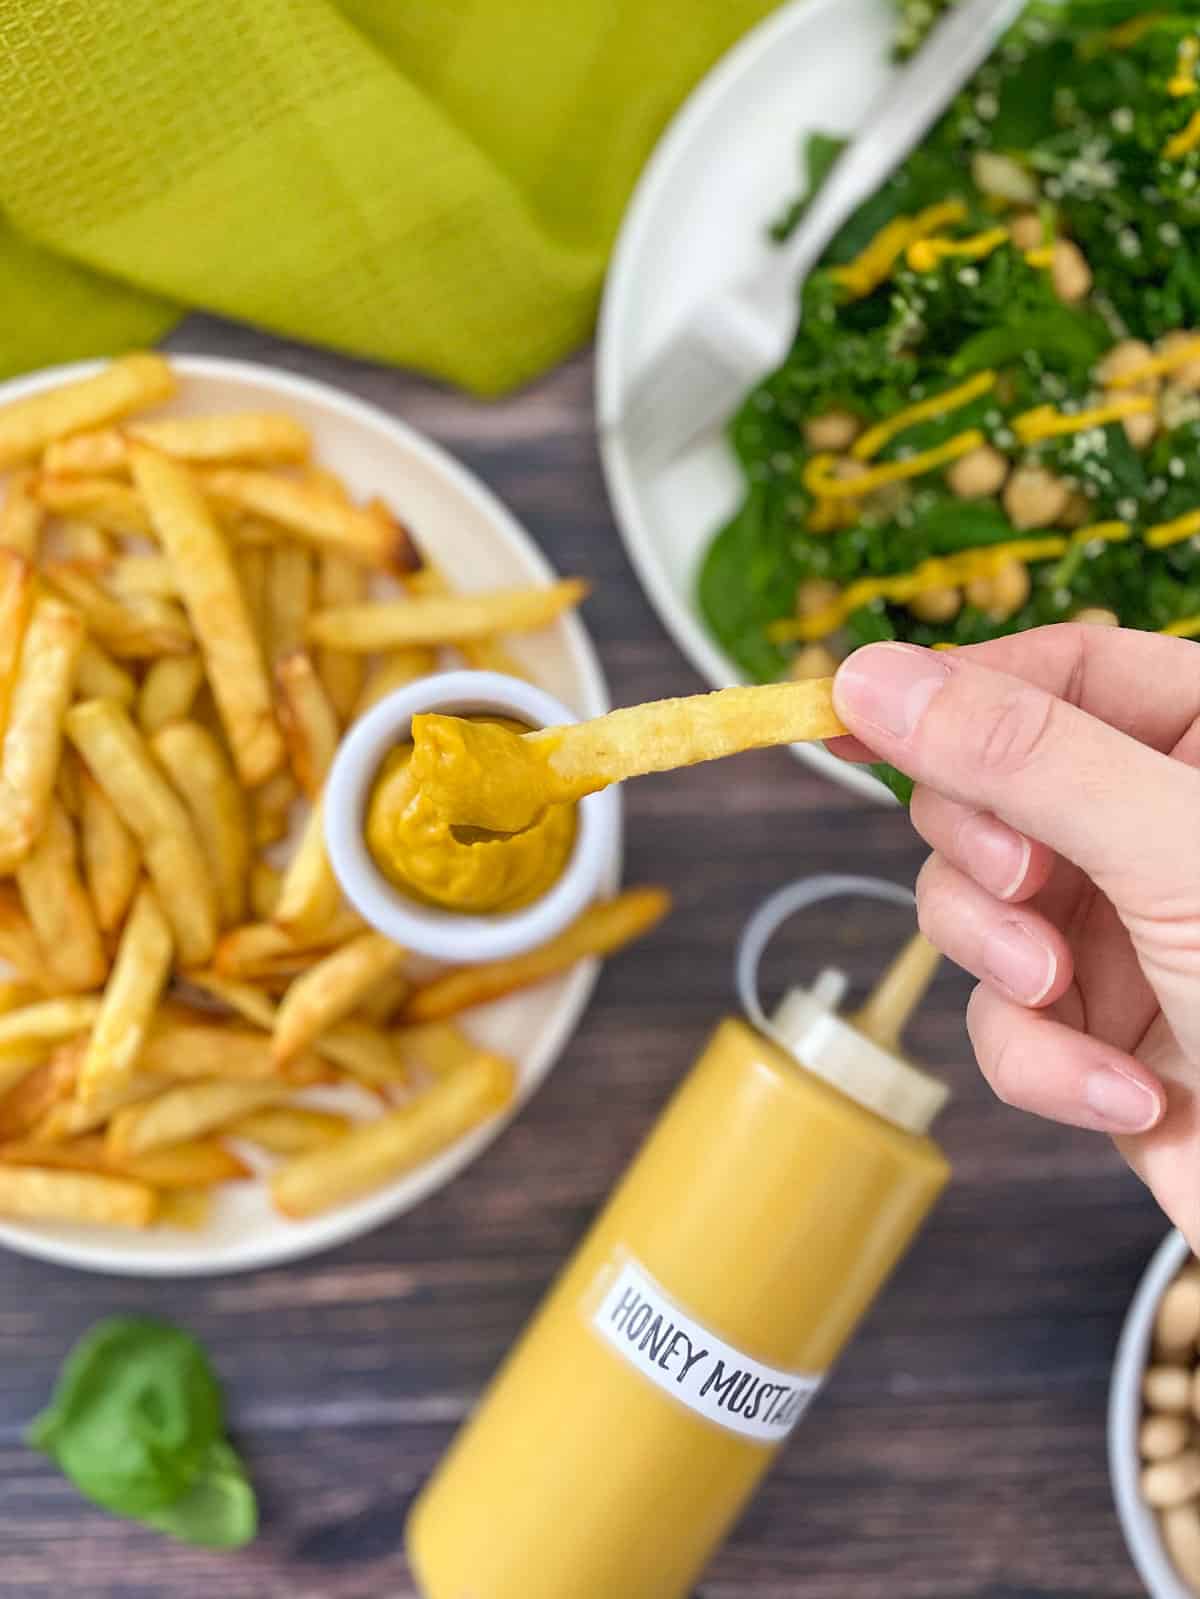 Hand dipping French fry into yellow dip.